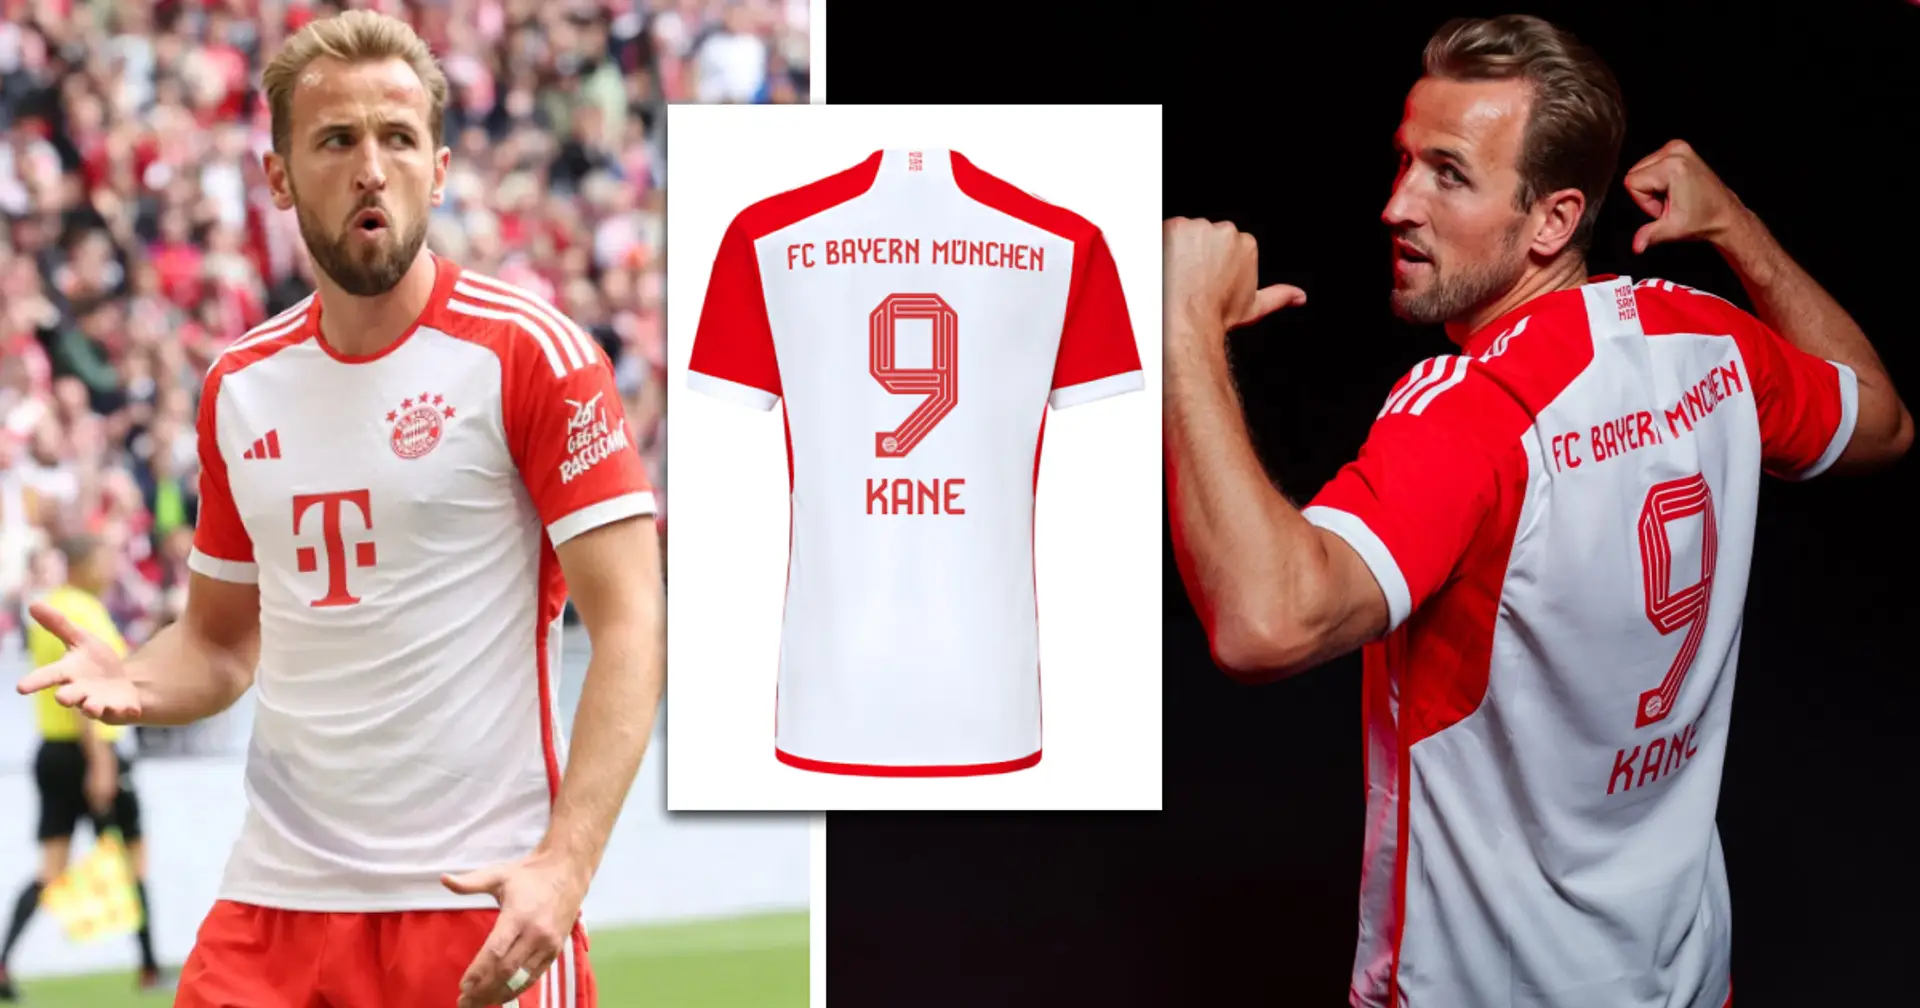 100,000 Harry Kane jerseys were sold: How much did FC Bayern Munich earn from them?